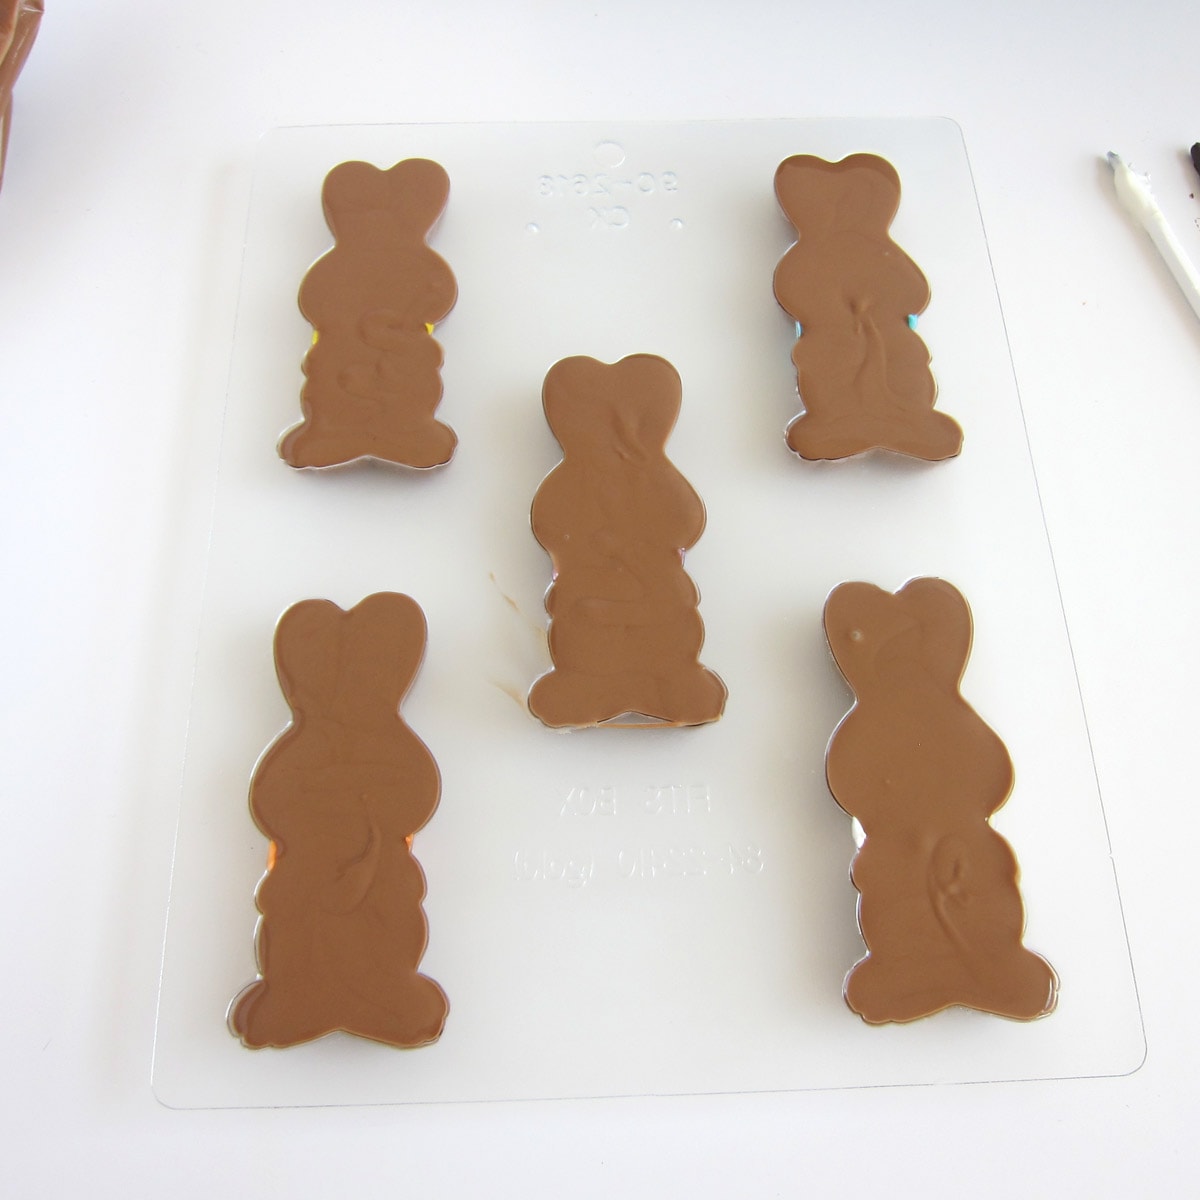 Bunny candy mold filled with milk chocolate.